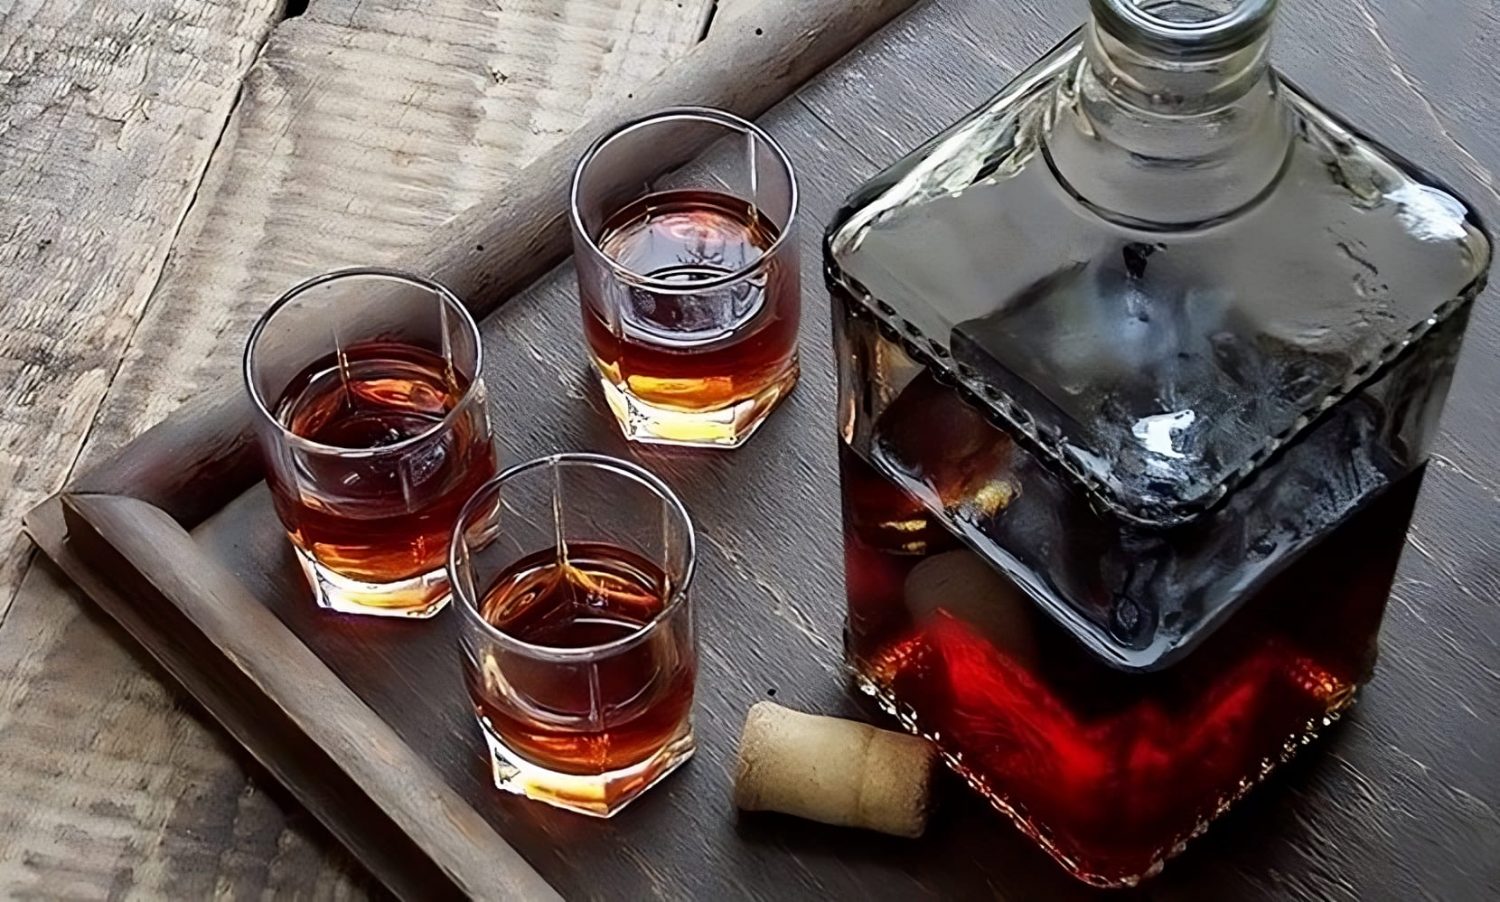 Homemade Brandy - Surprise Your Guests!